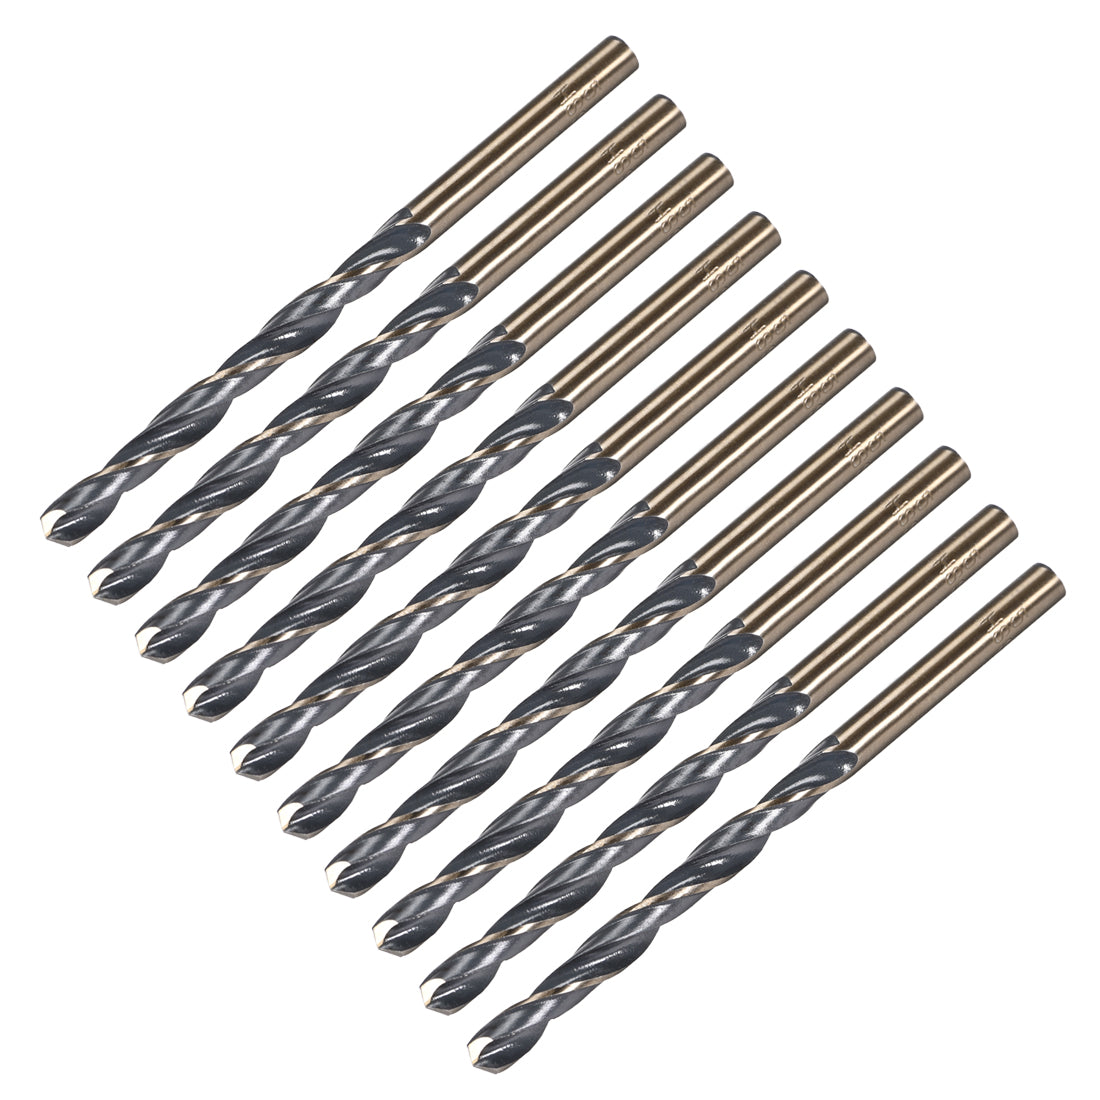 uxcell Uxcell Straight Shank Twist Drill Bits 5mm HSS 4341 with 5mm Shank 10 Pcs